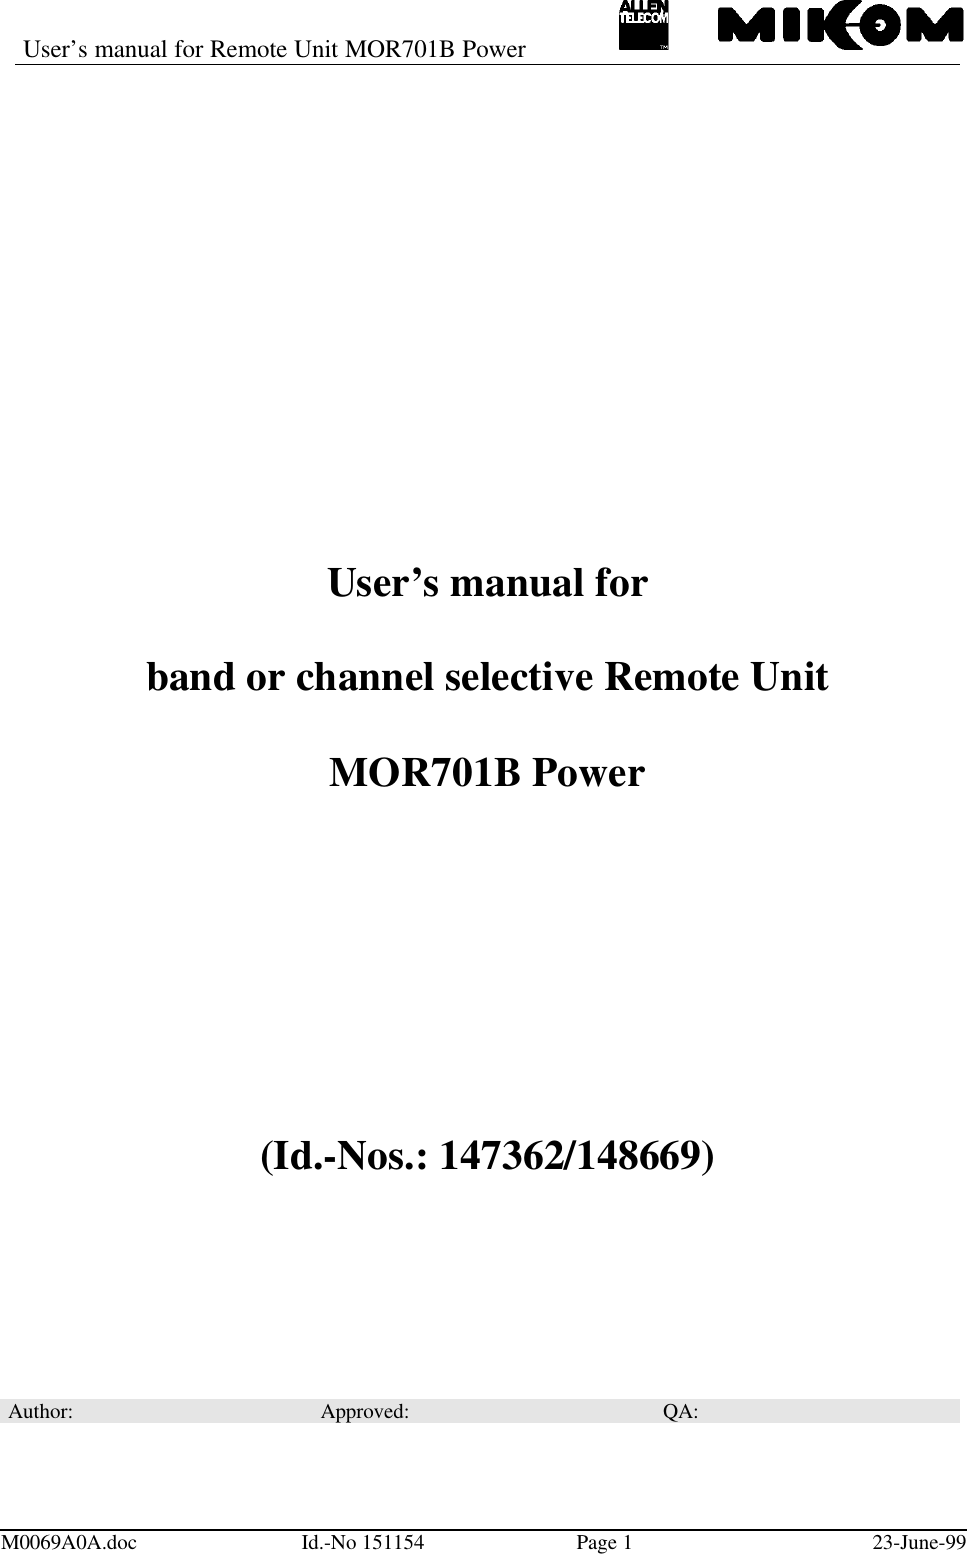 User’s manual for Remote Unit MOR701B PowerM0069A0A.doc Id.-No 151154 Page 123-June-99User’s manual forband or channel selective Remote UnitMOR701B Power(Id.-Nos.: 147362/148669)Author: Approved: QA: